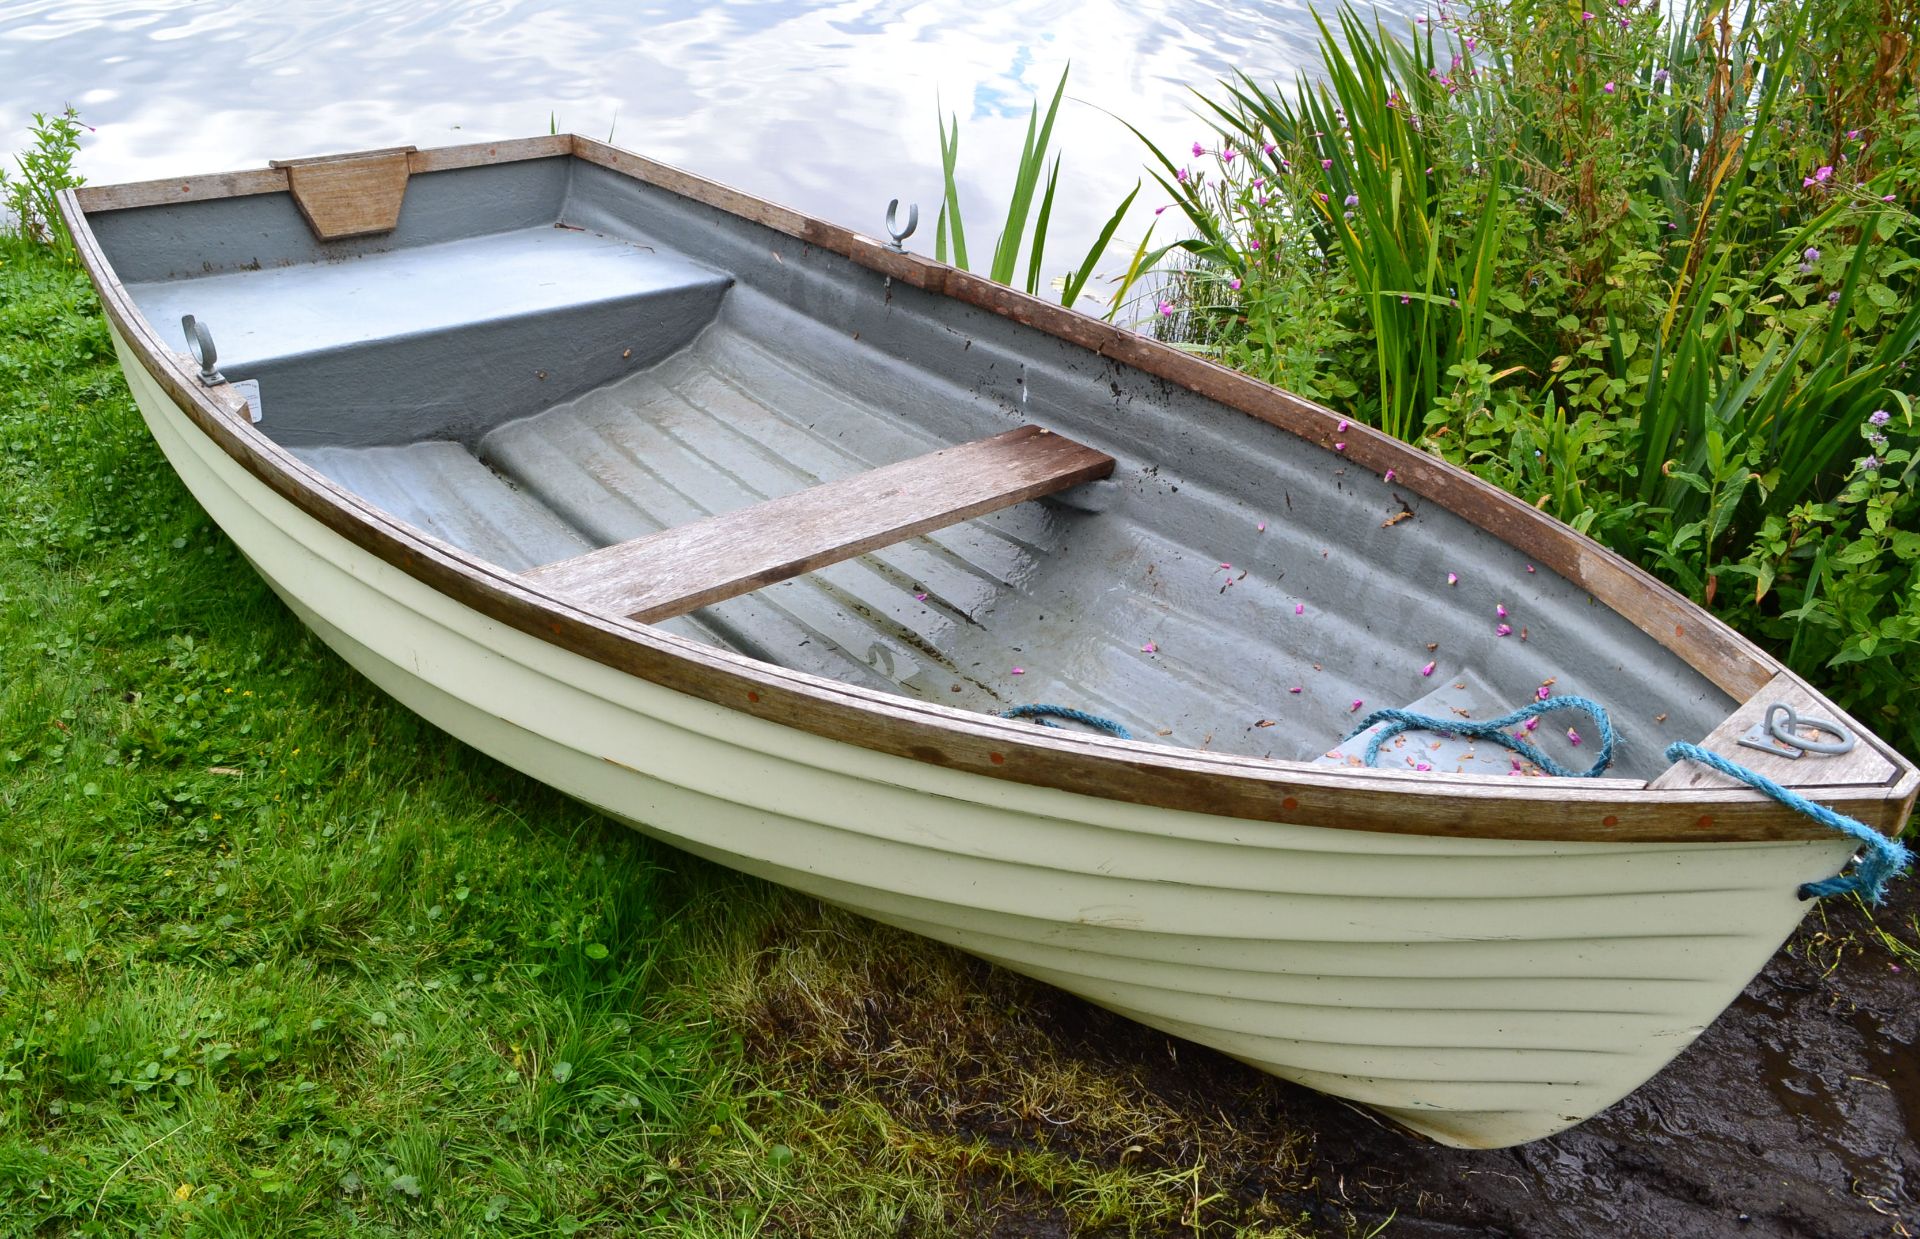 1 x Clovelly 290 Glass Fibre Rowing Boat - 240Kg Maximum Load - CL226 - Location: Knutsford WA16 - Image 11 of 15